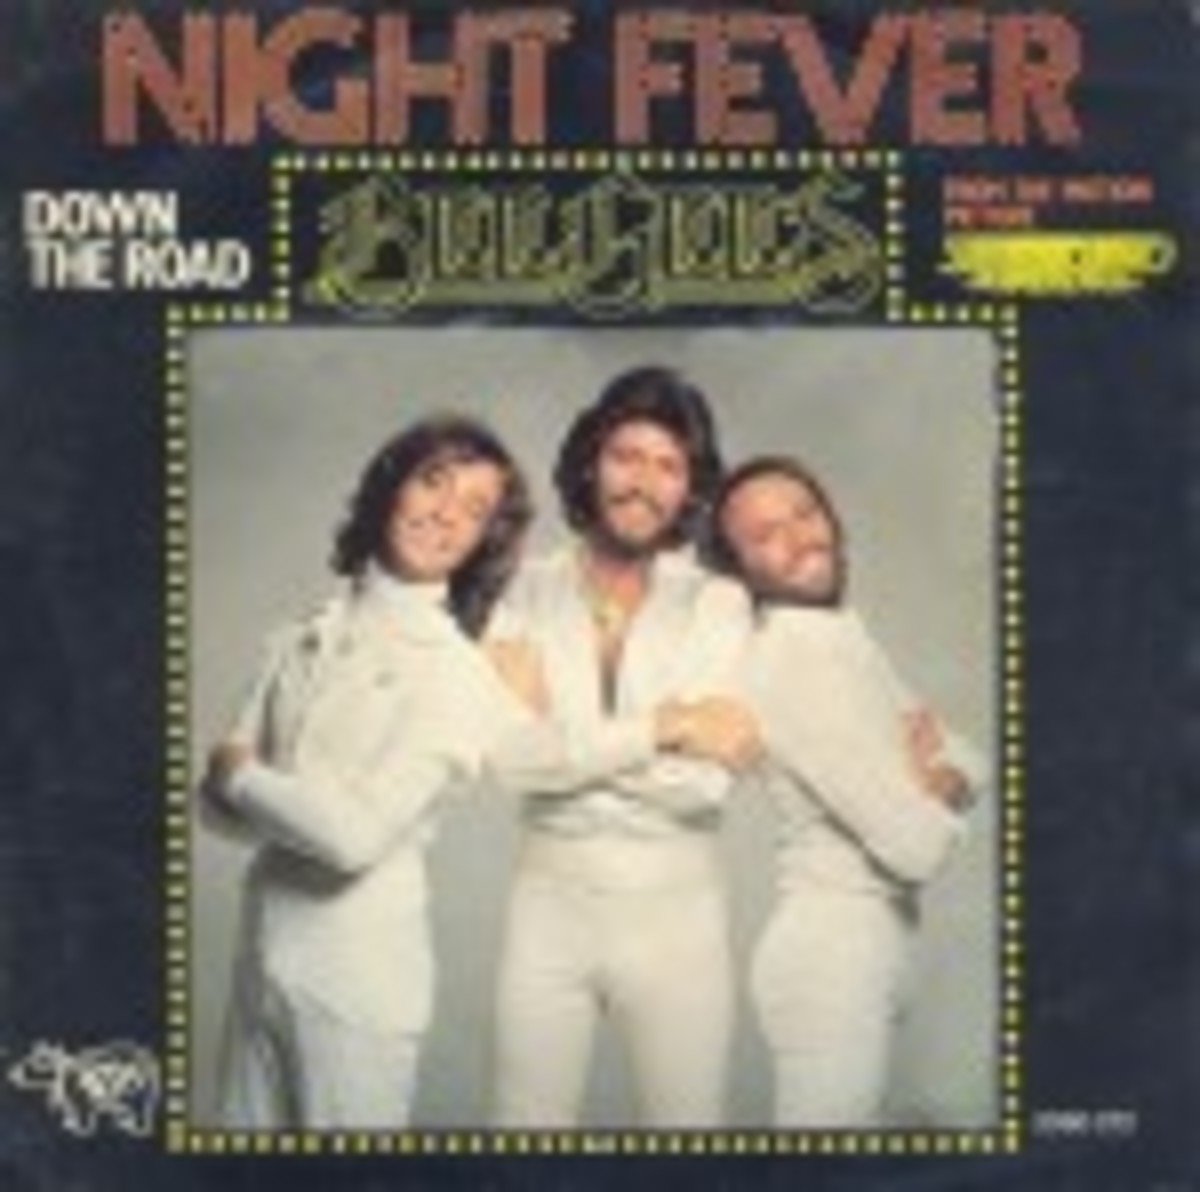 Bee Gees Night Fever